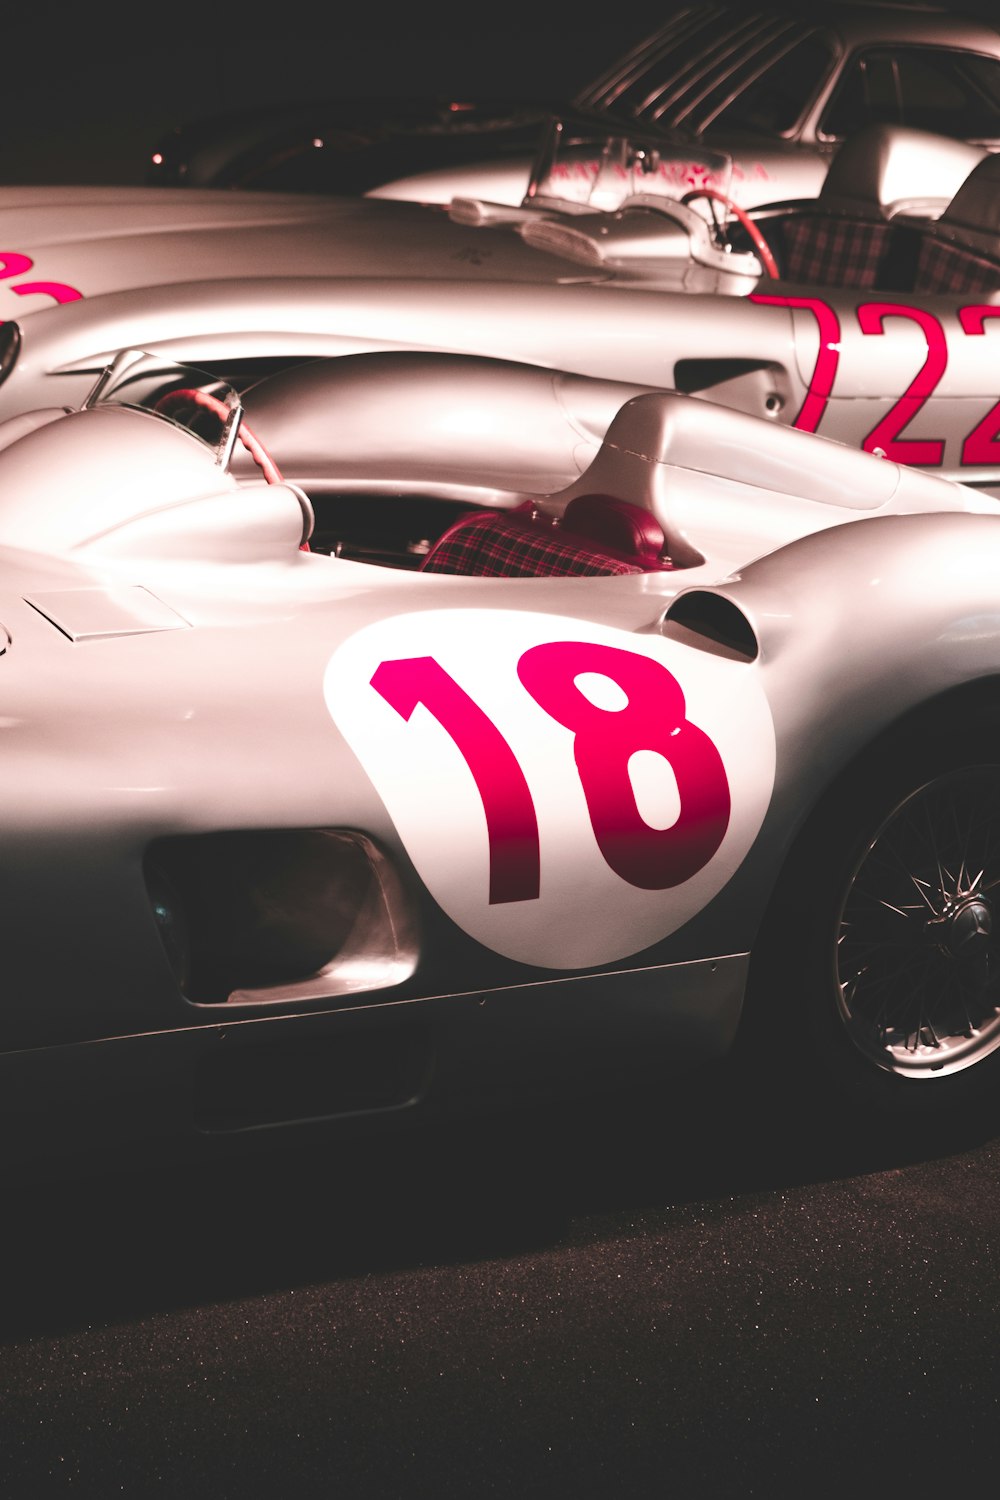 a row of racing cars with numbers painted on them